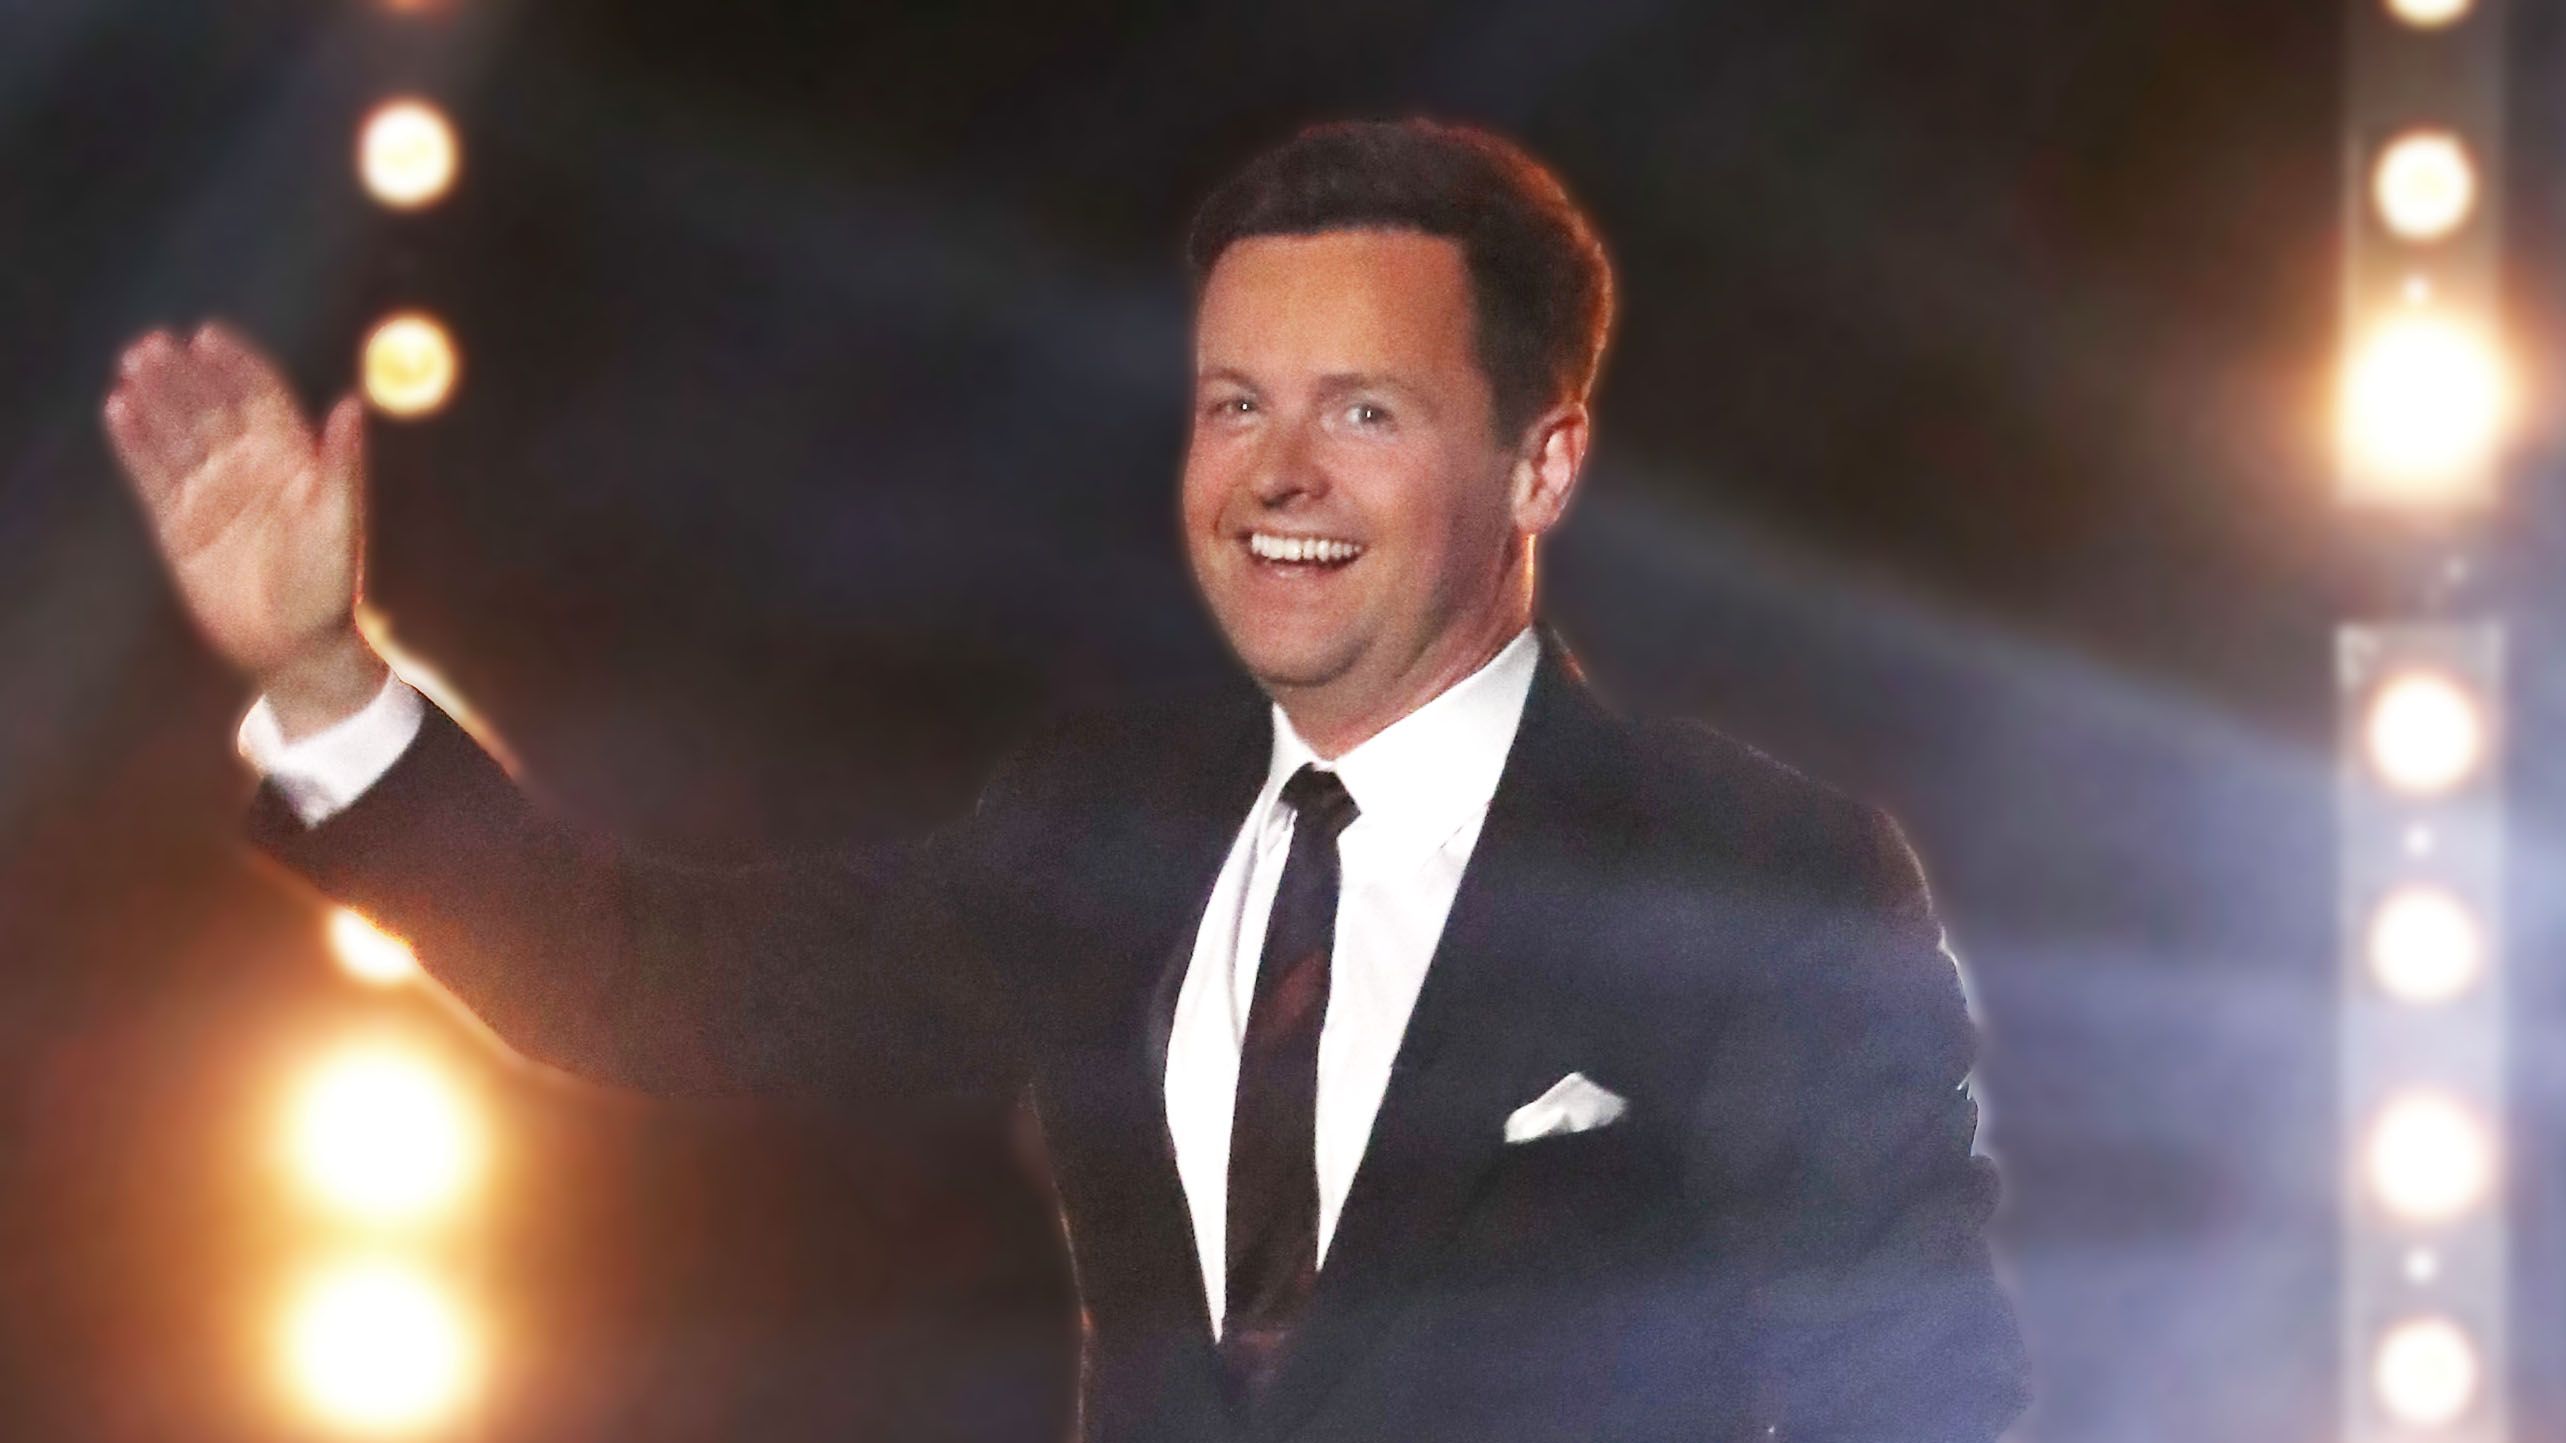 Dec Donnelly thanks fans for support in heartfelt message | Celebrity ...